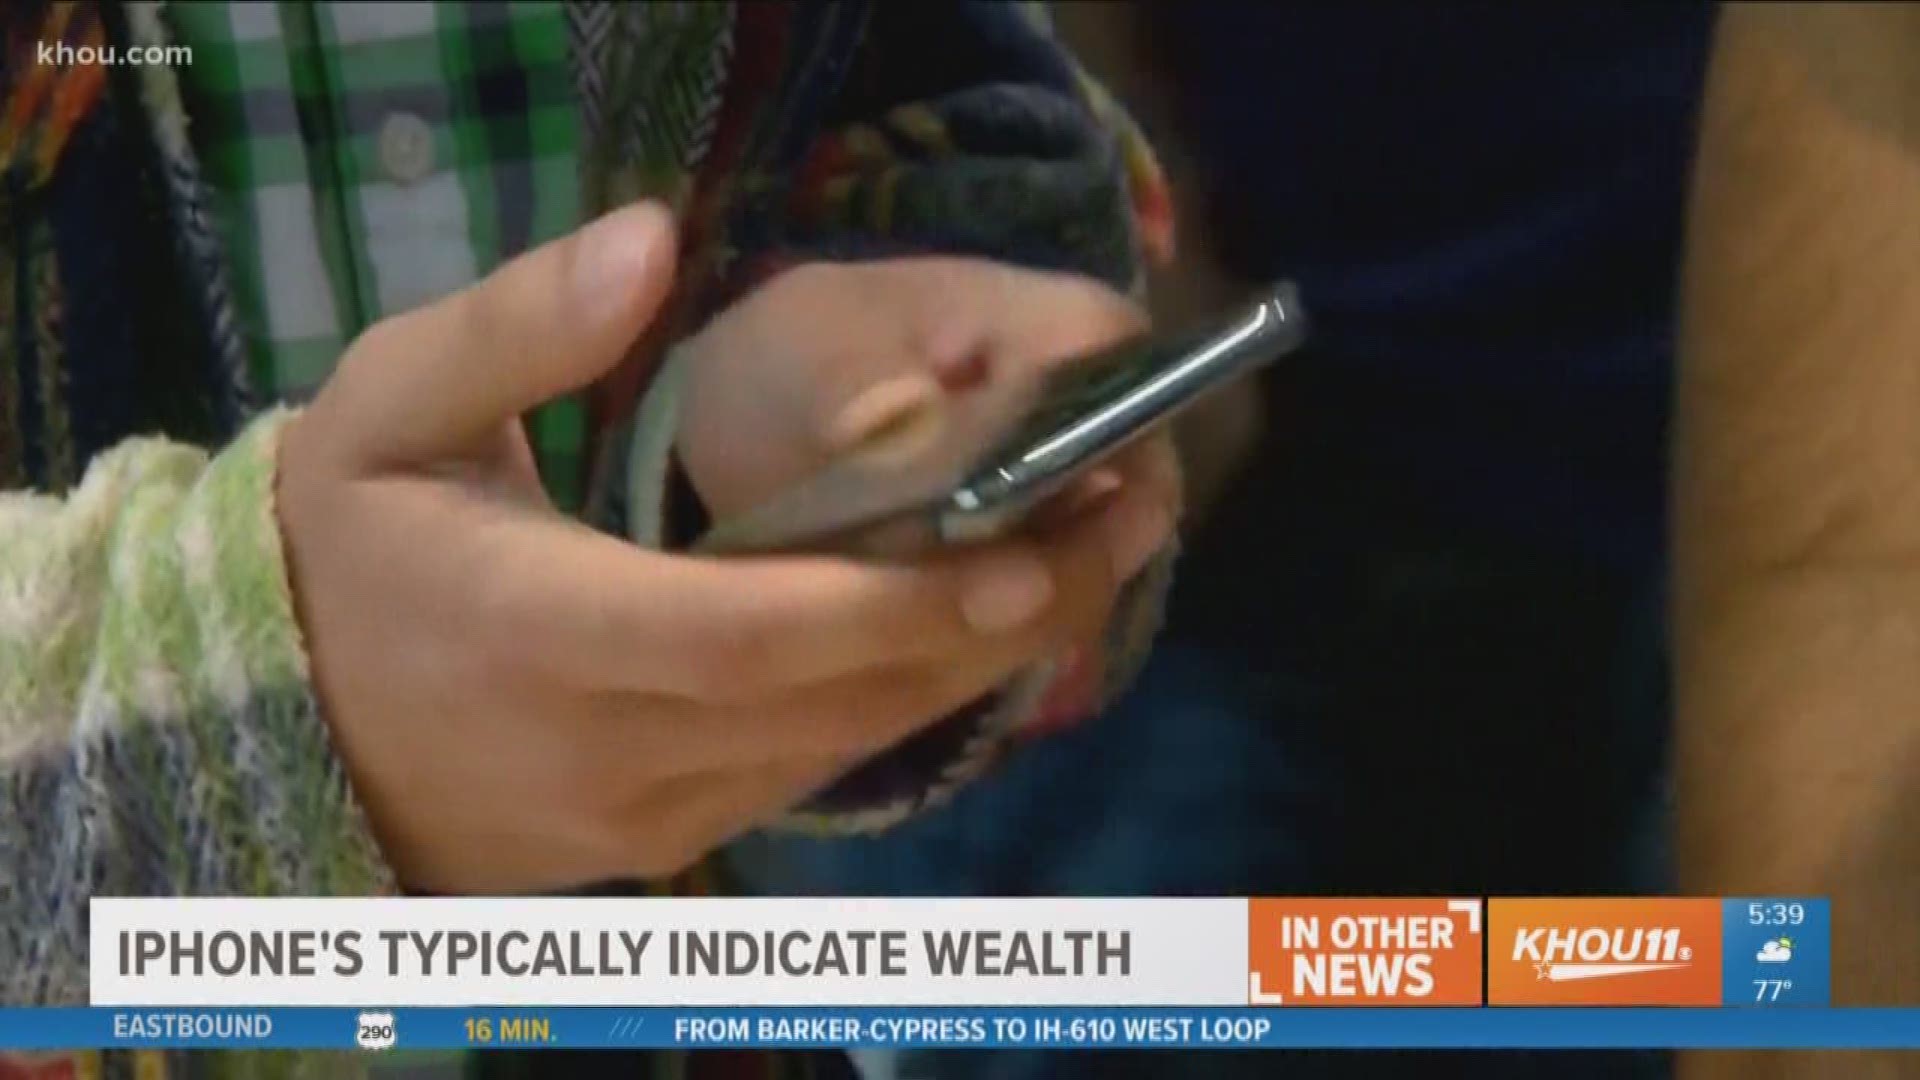 iPhones typically indicate wealth